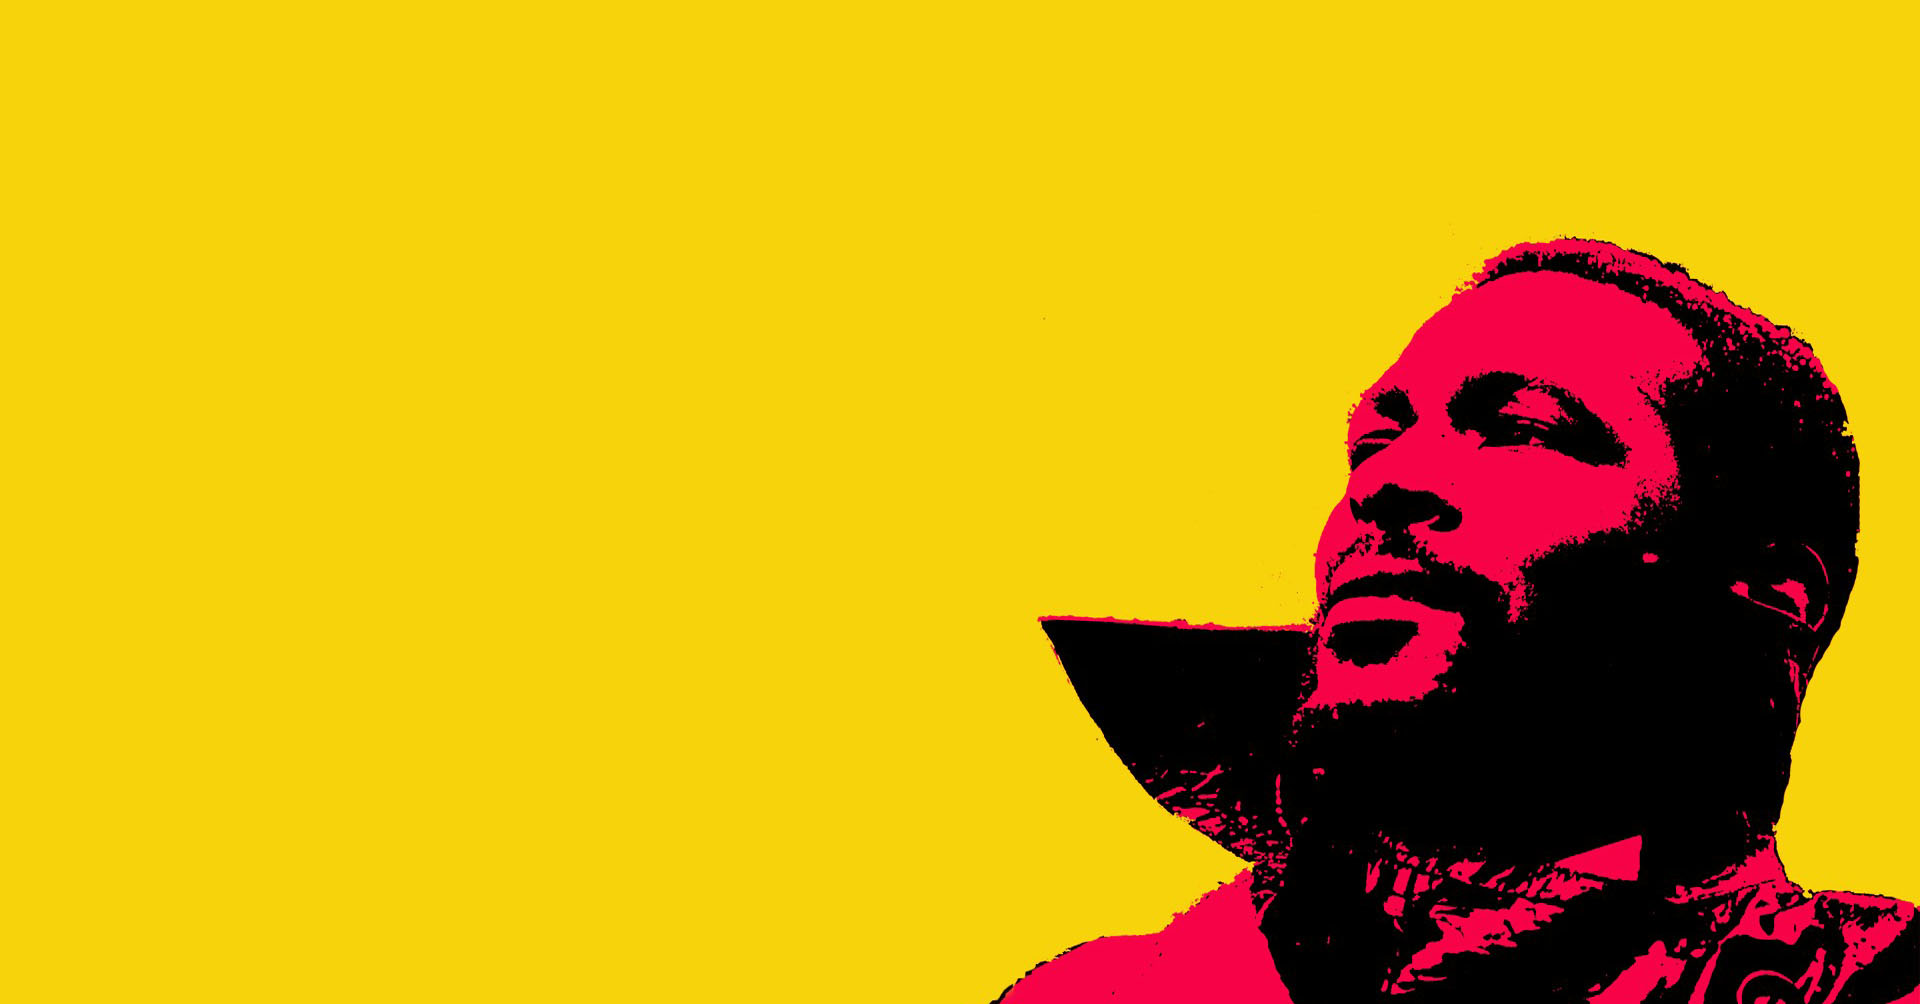 Marvin Gaye Image HD Wallpaper And Background Photos